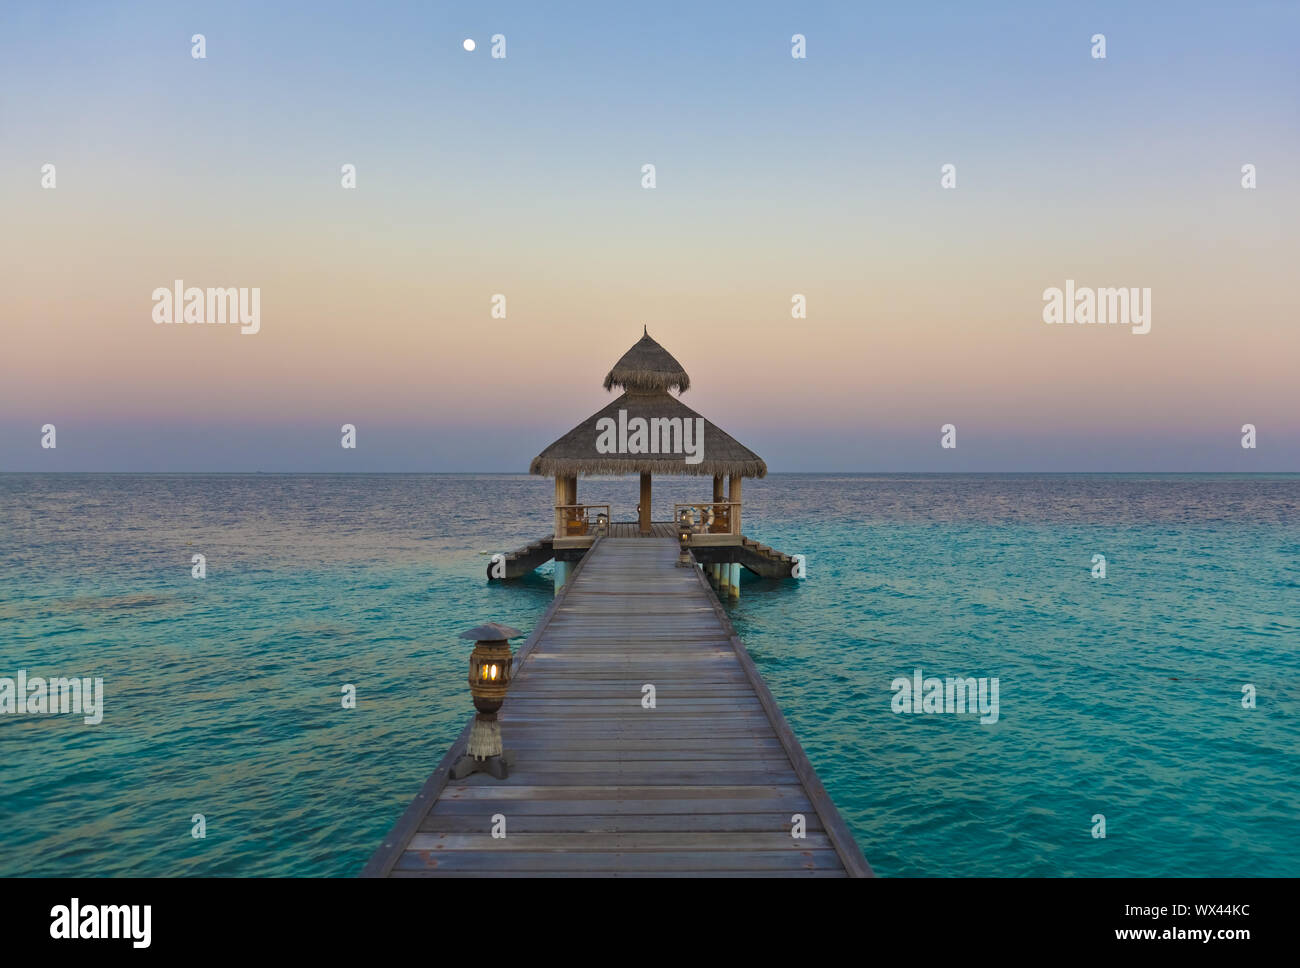 Jetty in the moonlight on the Maldives Stock Photo